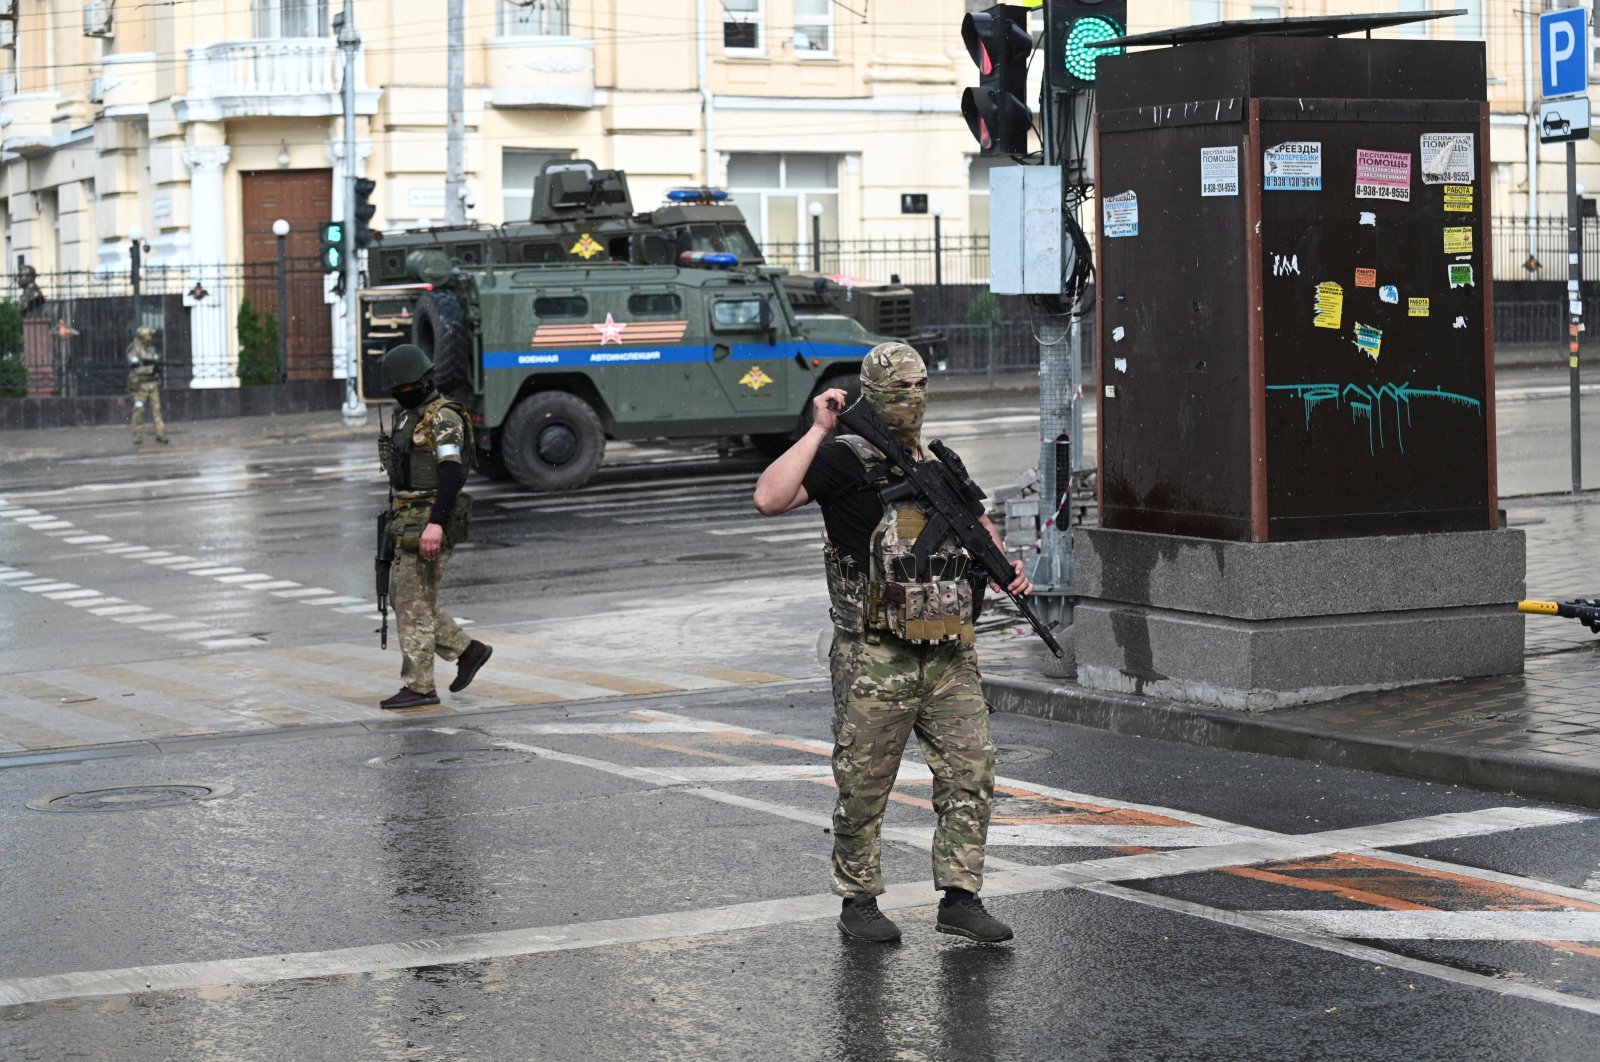 Fighters of Wagner private mercenary group are deployed in a street near the headquarters of the Southern Military District in the city of Rostov-on-Don, Russia, June 24, 2023. (Reuters Photo)